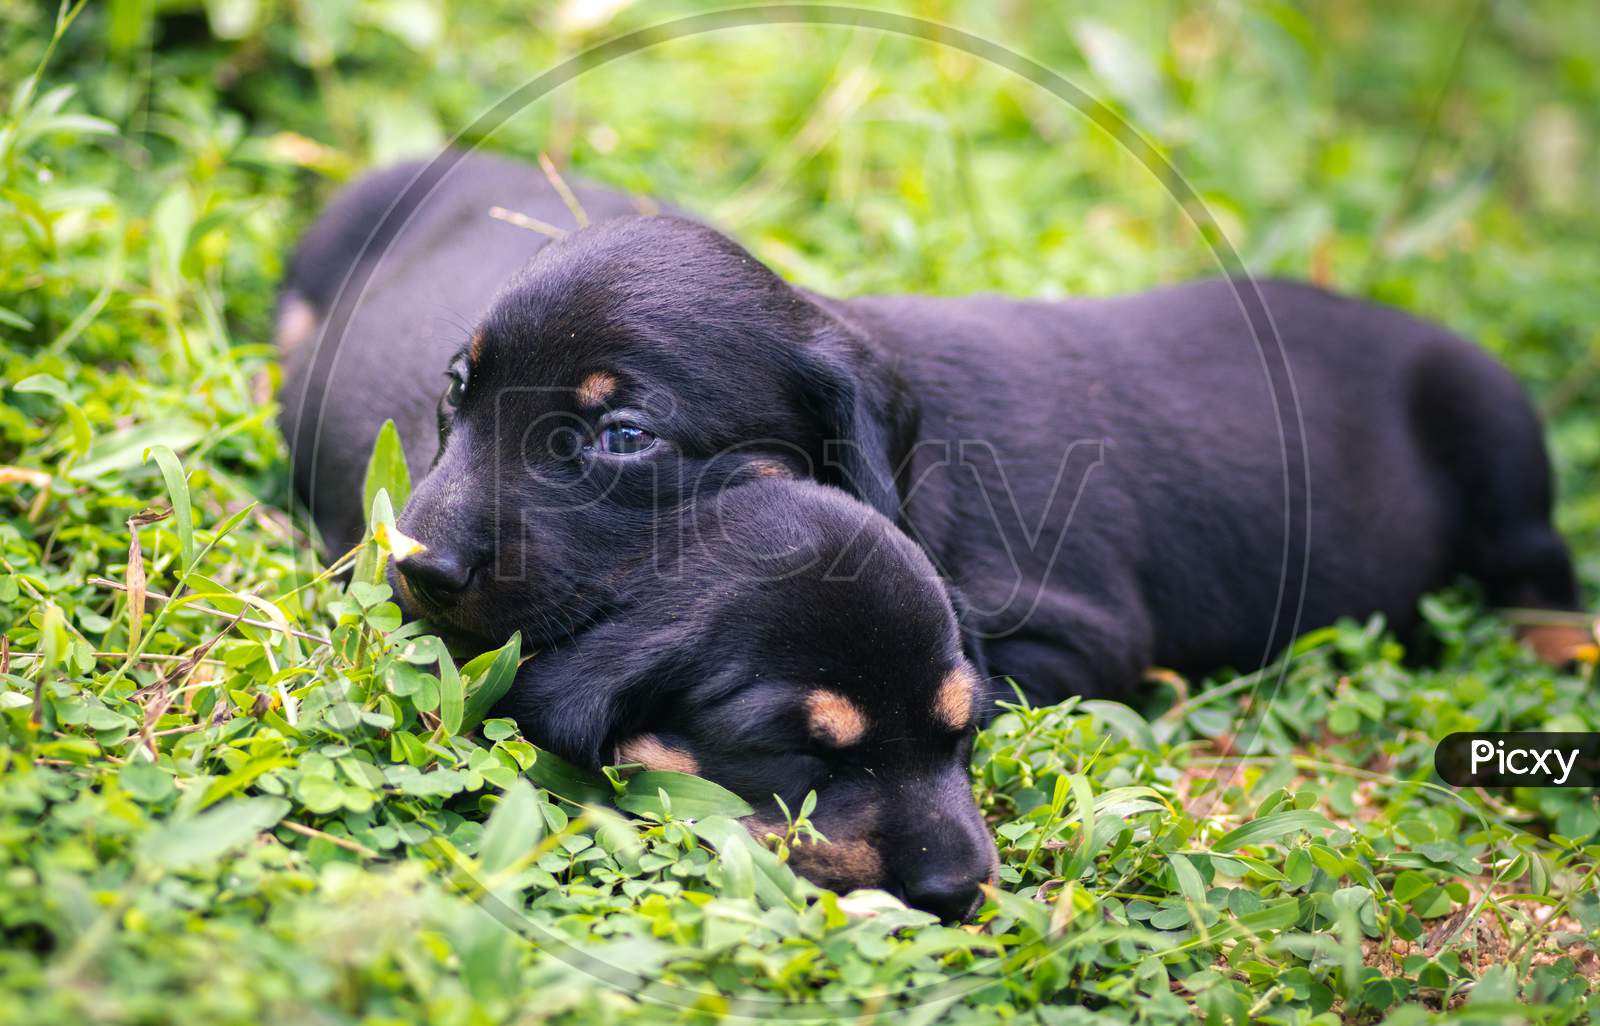 Cute Dachshund Puppies Lying In The Backyard, Cuddle And Play With Newborn Siblings, Explore, Watch And Learn The Environment, Taking Care Each Other Concept, Older Brother On Top Of Younger Pup.